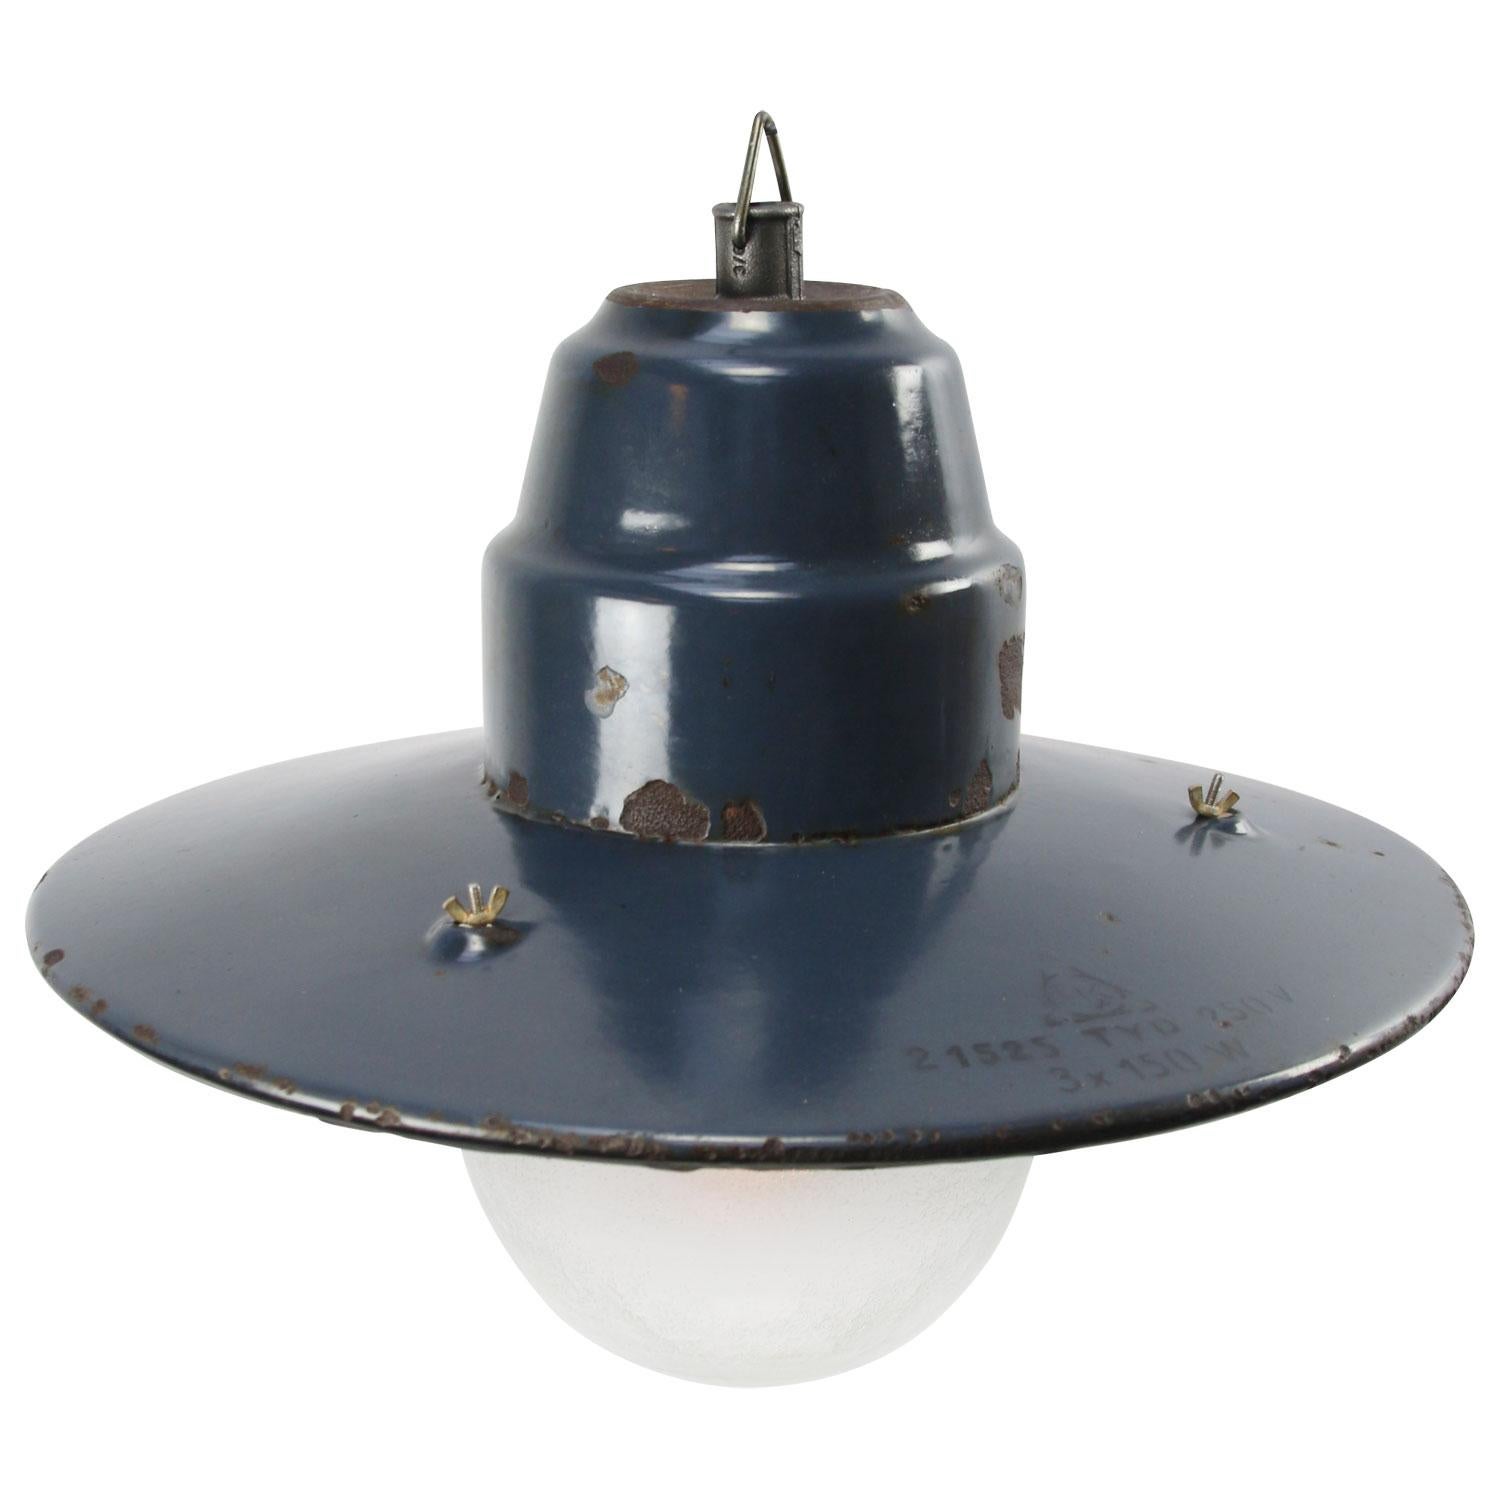 Blue enamel, frosted glass factory pendant lamp.
Dark blue enamel. White interior.

Weight: 4.50 kg / 9.9 lb

Priced per individual item. All lamps have been made suitable by international standards for incandescent light bulbs,